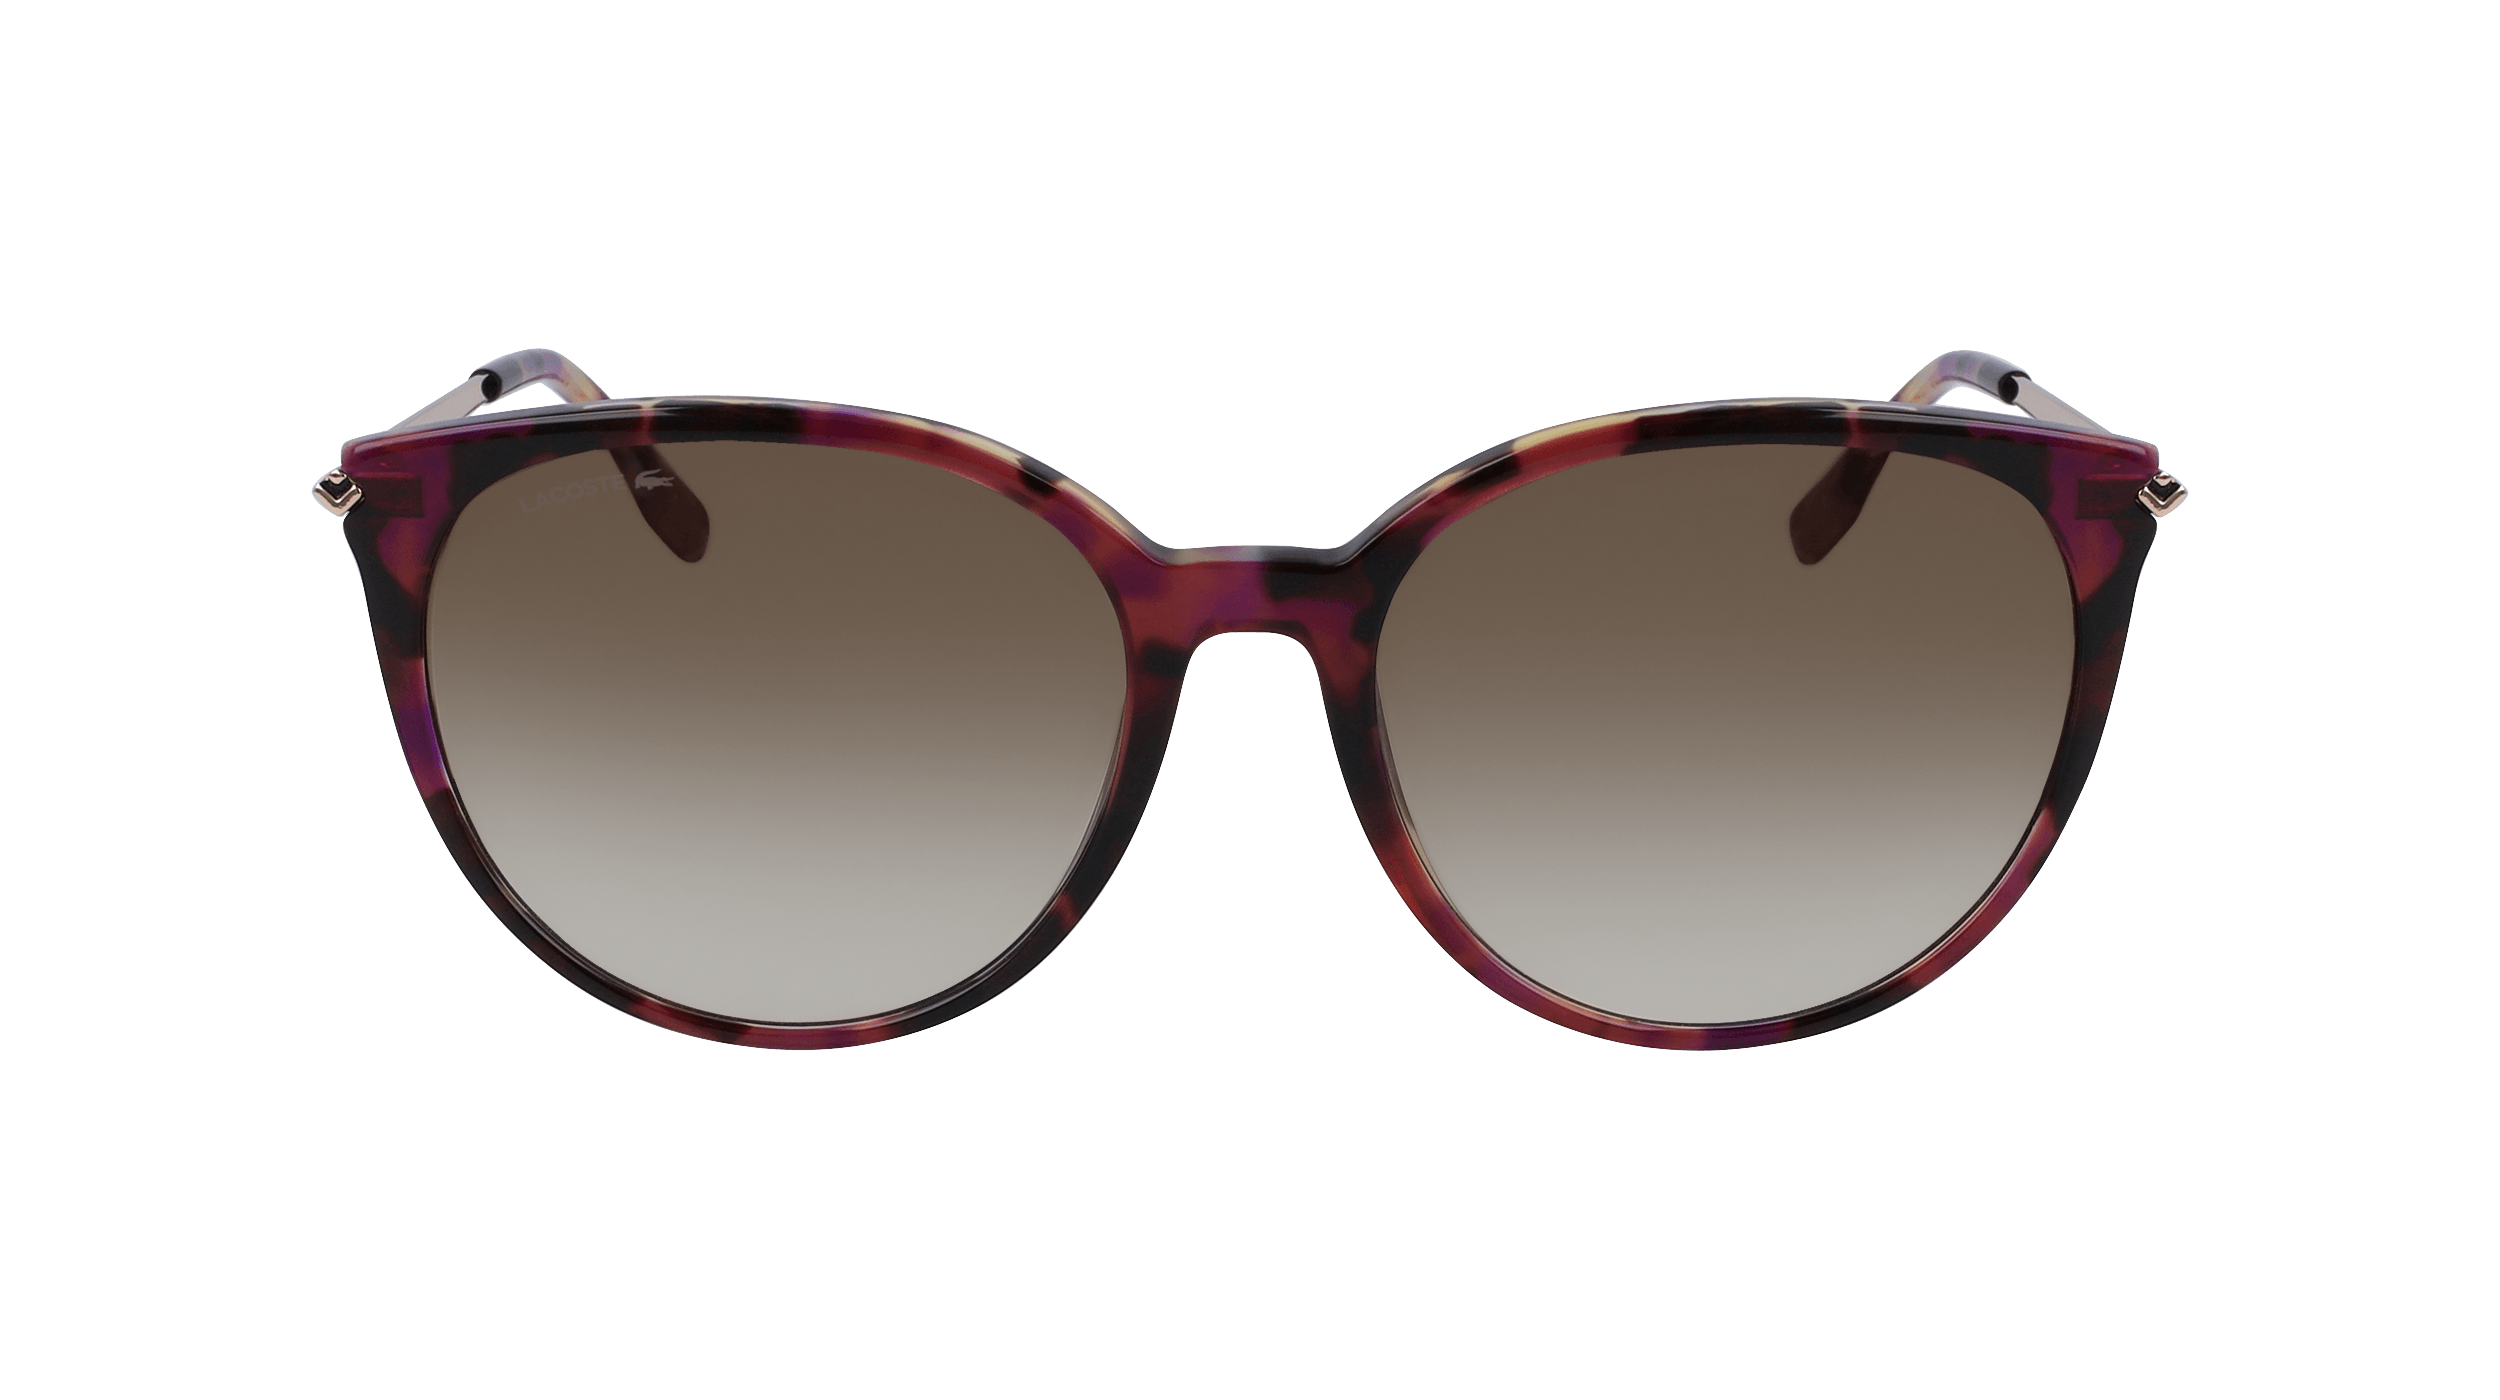 Lentes Lacoste Mujer